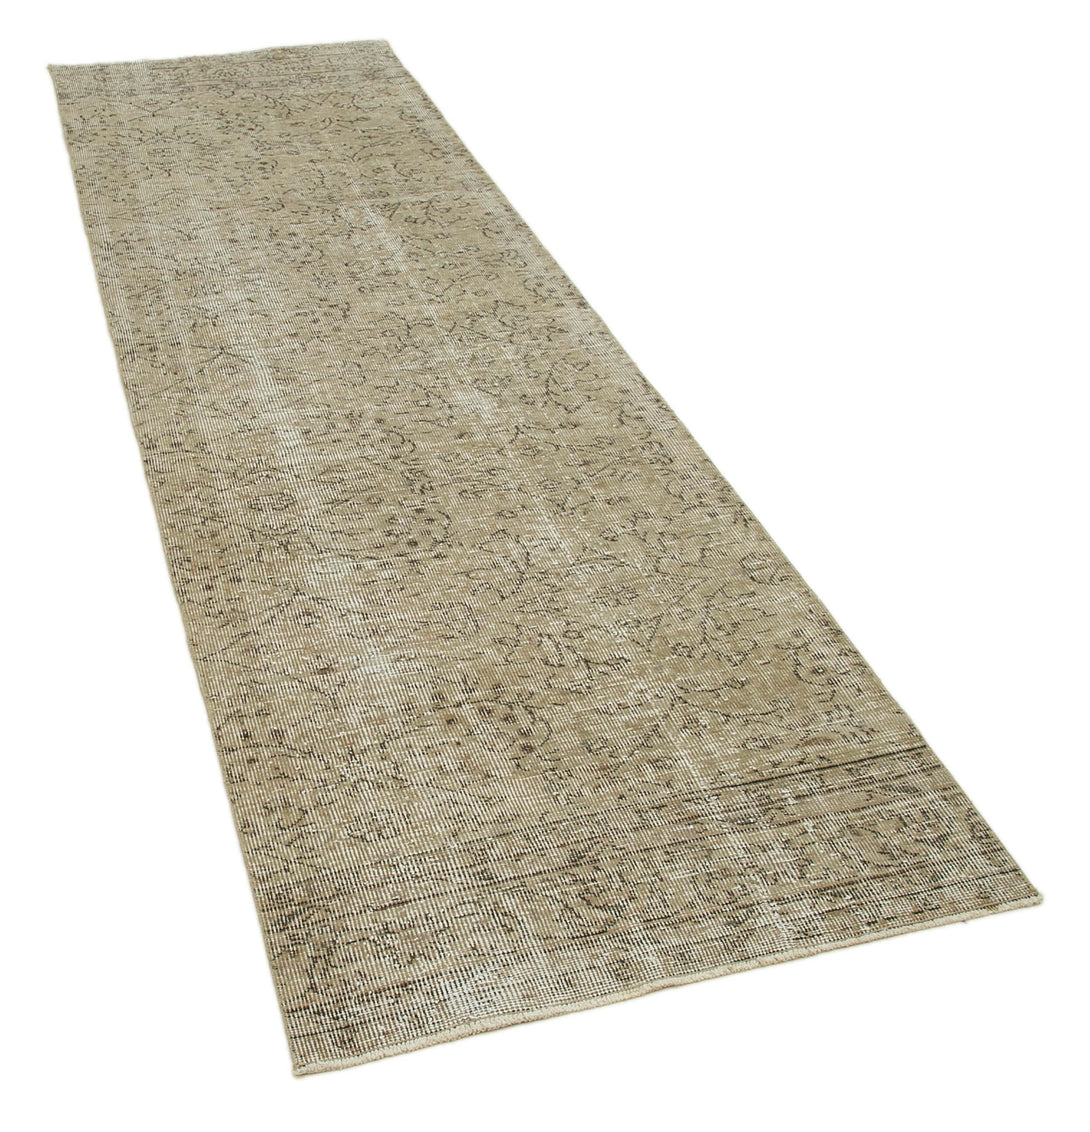 Handmade Overdyed Runner > Design# OL-AC-34204 > Size: 2'-11" x 9'-3", Carpet Culture Rugs, Handmade Rugs, NYC Rugs, New Rugs, Shop Rugs, Rug Store, Outlet Rugs, SoHo Rugs, Rugs in USA